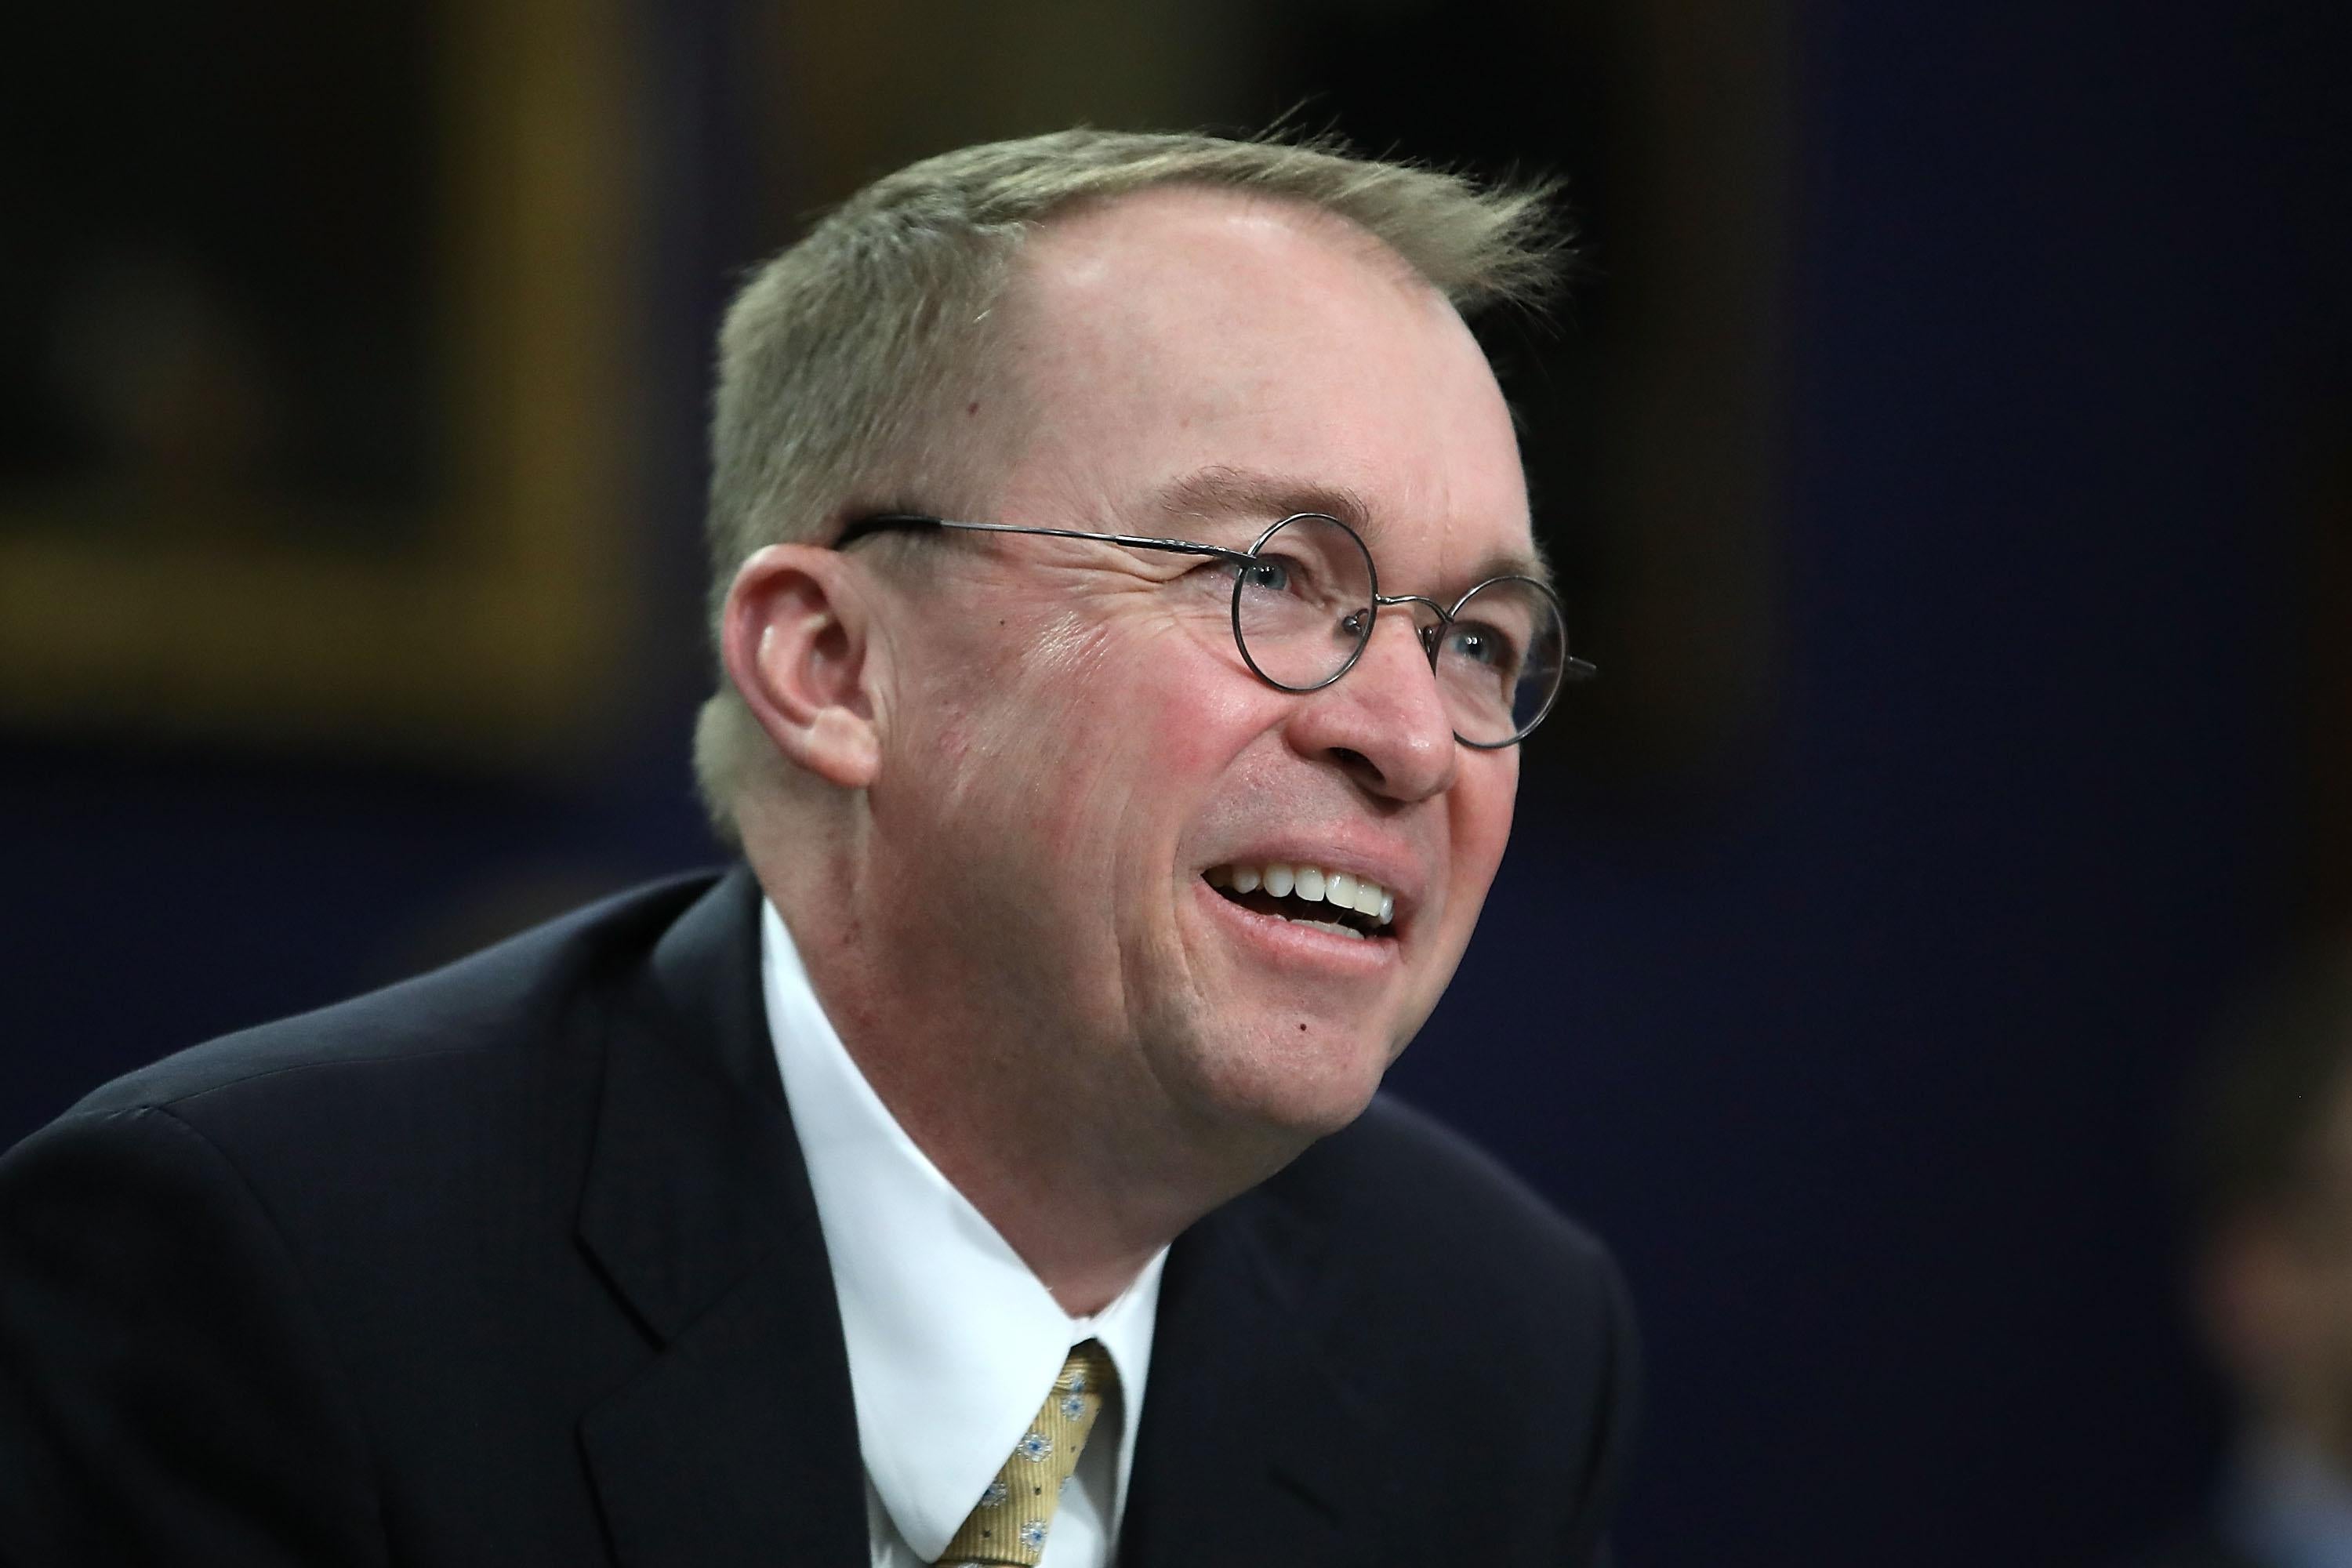 Office of Management and Budget Director Mick Mulvaney testifies during a House Appropriations Committee hearing on Capitol Hill, April 18, 2018 in Washington, DC. The committee is hearing testimony on President Donald Trump's FY2019 budget request for the Office of Management and Budget. 